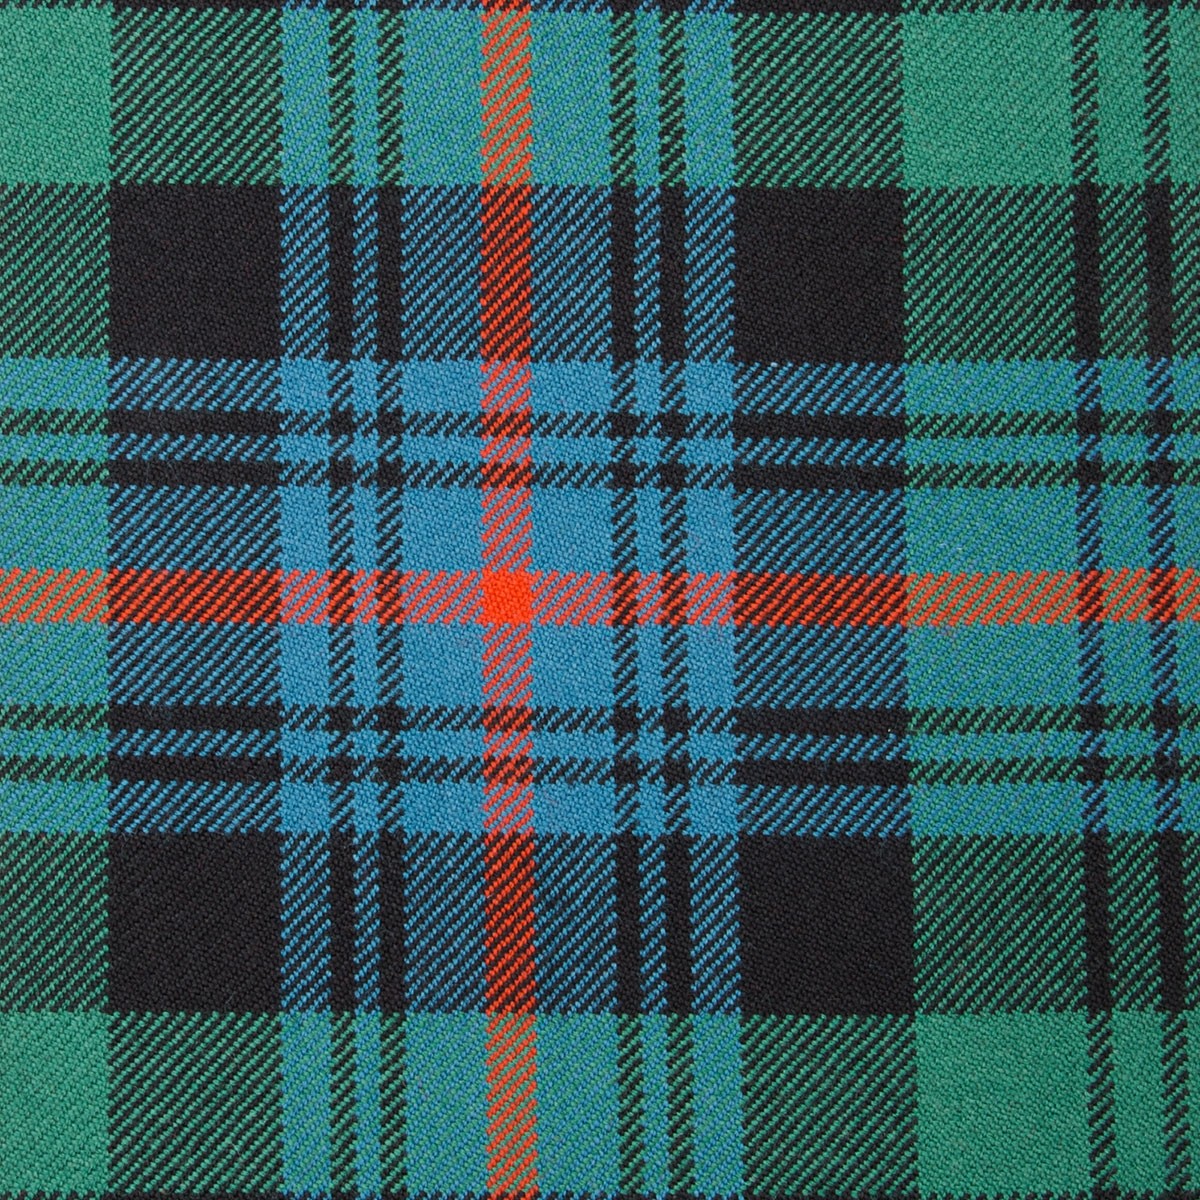 Armstrong Ancient Heavy Weight Tartan Fabric